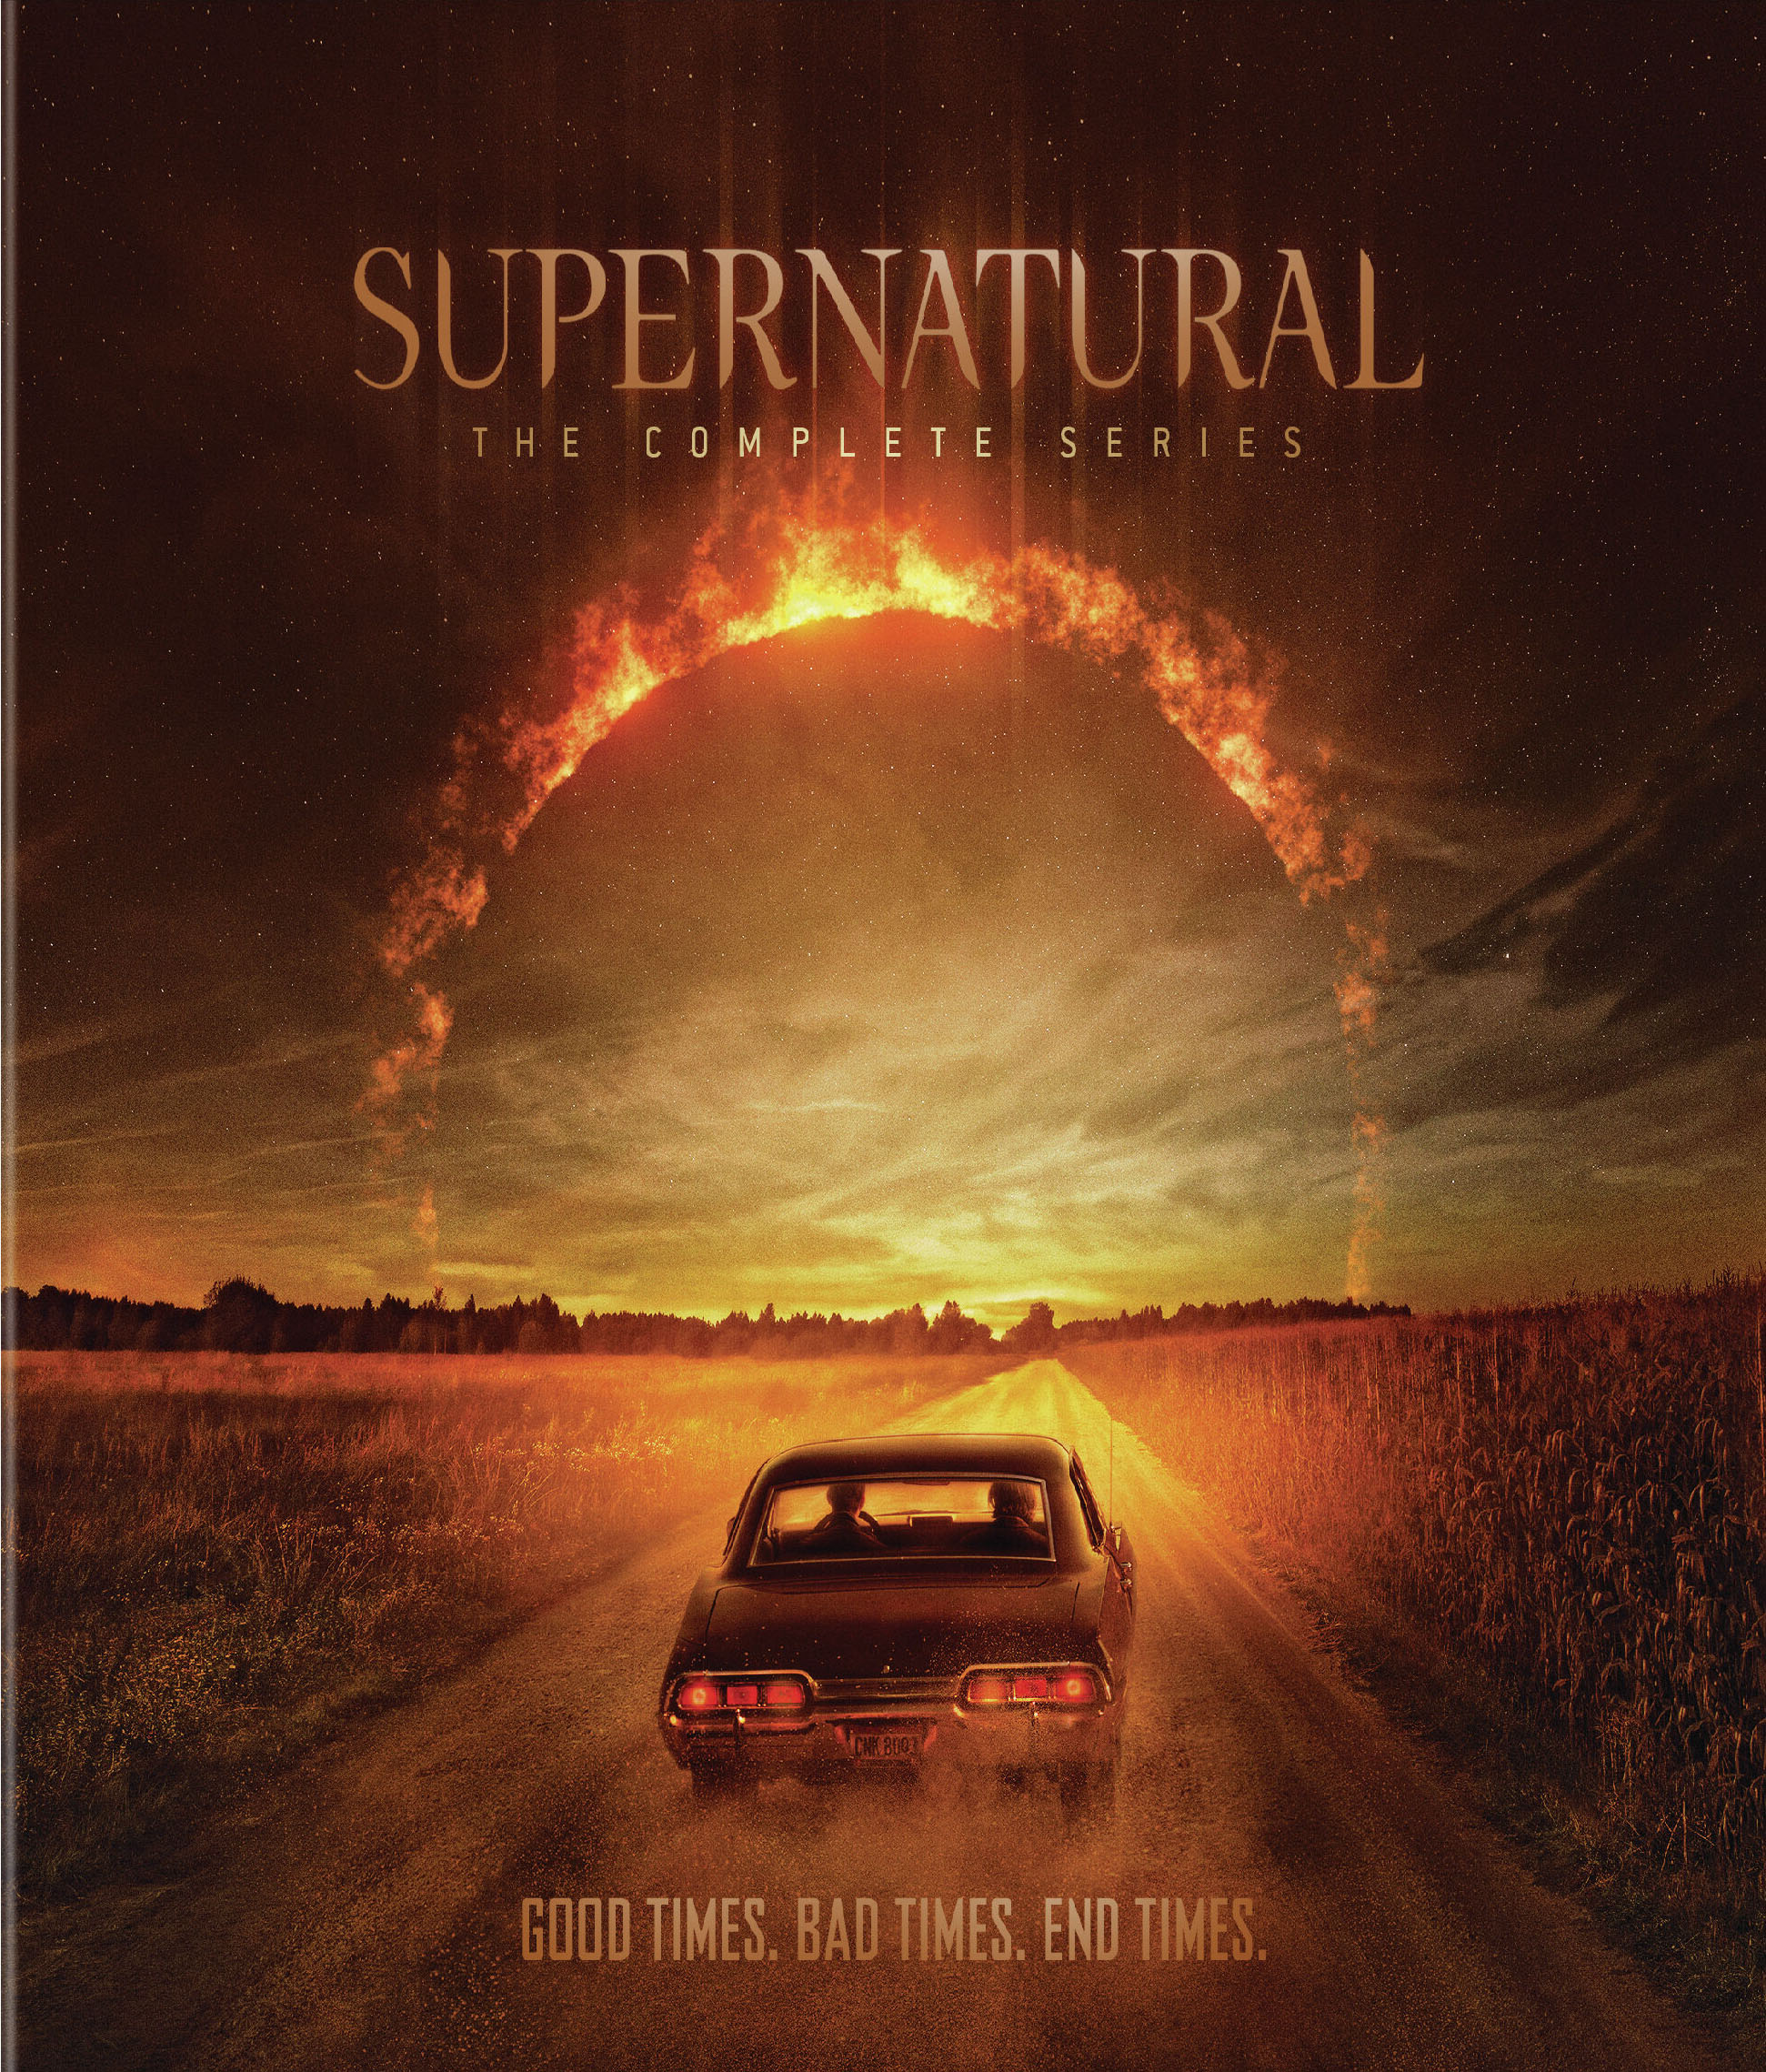 Supernatural: The Complete Series (DVD) - image 1 of 3